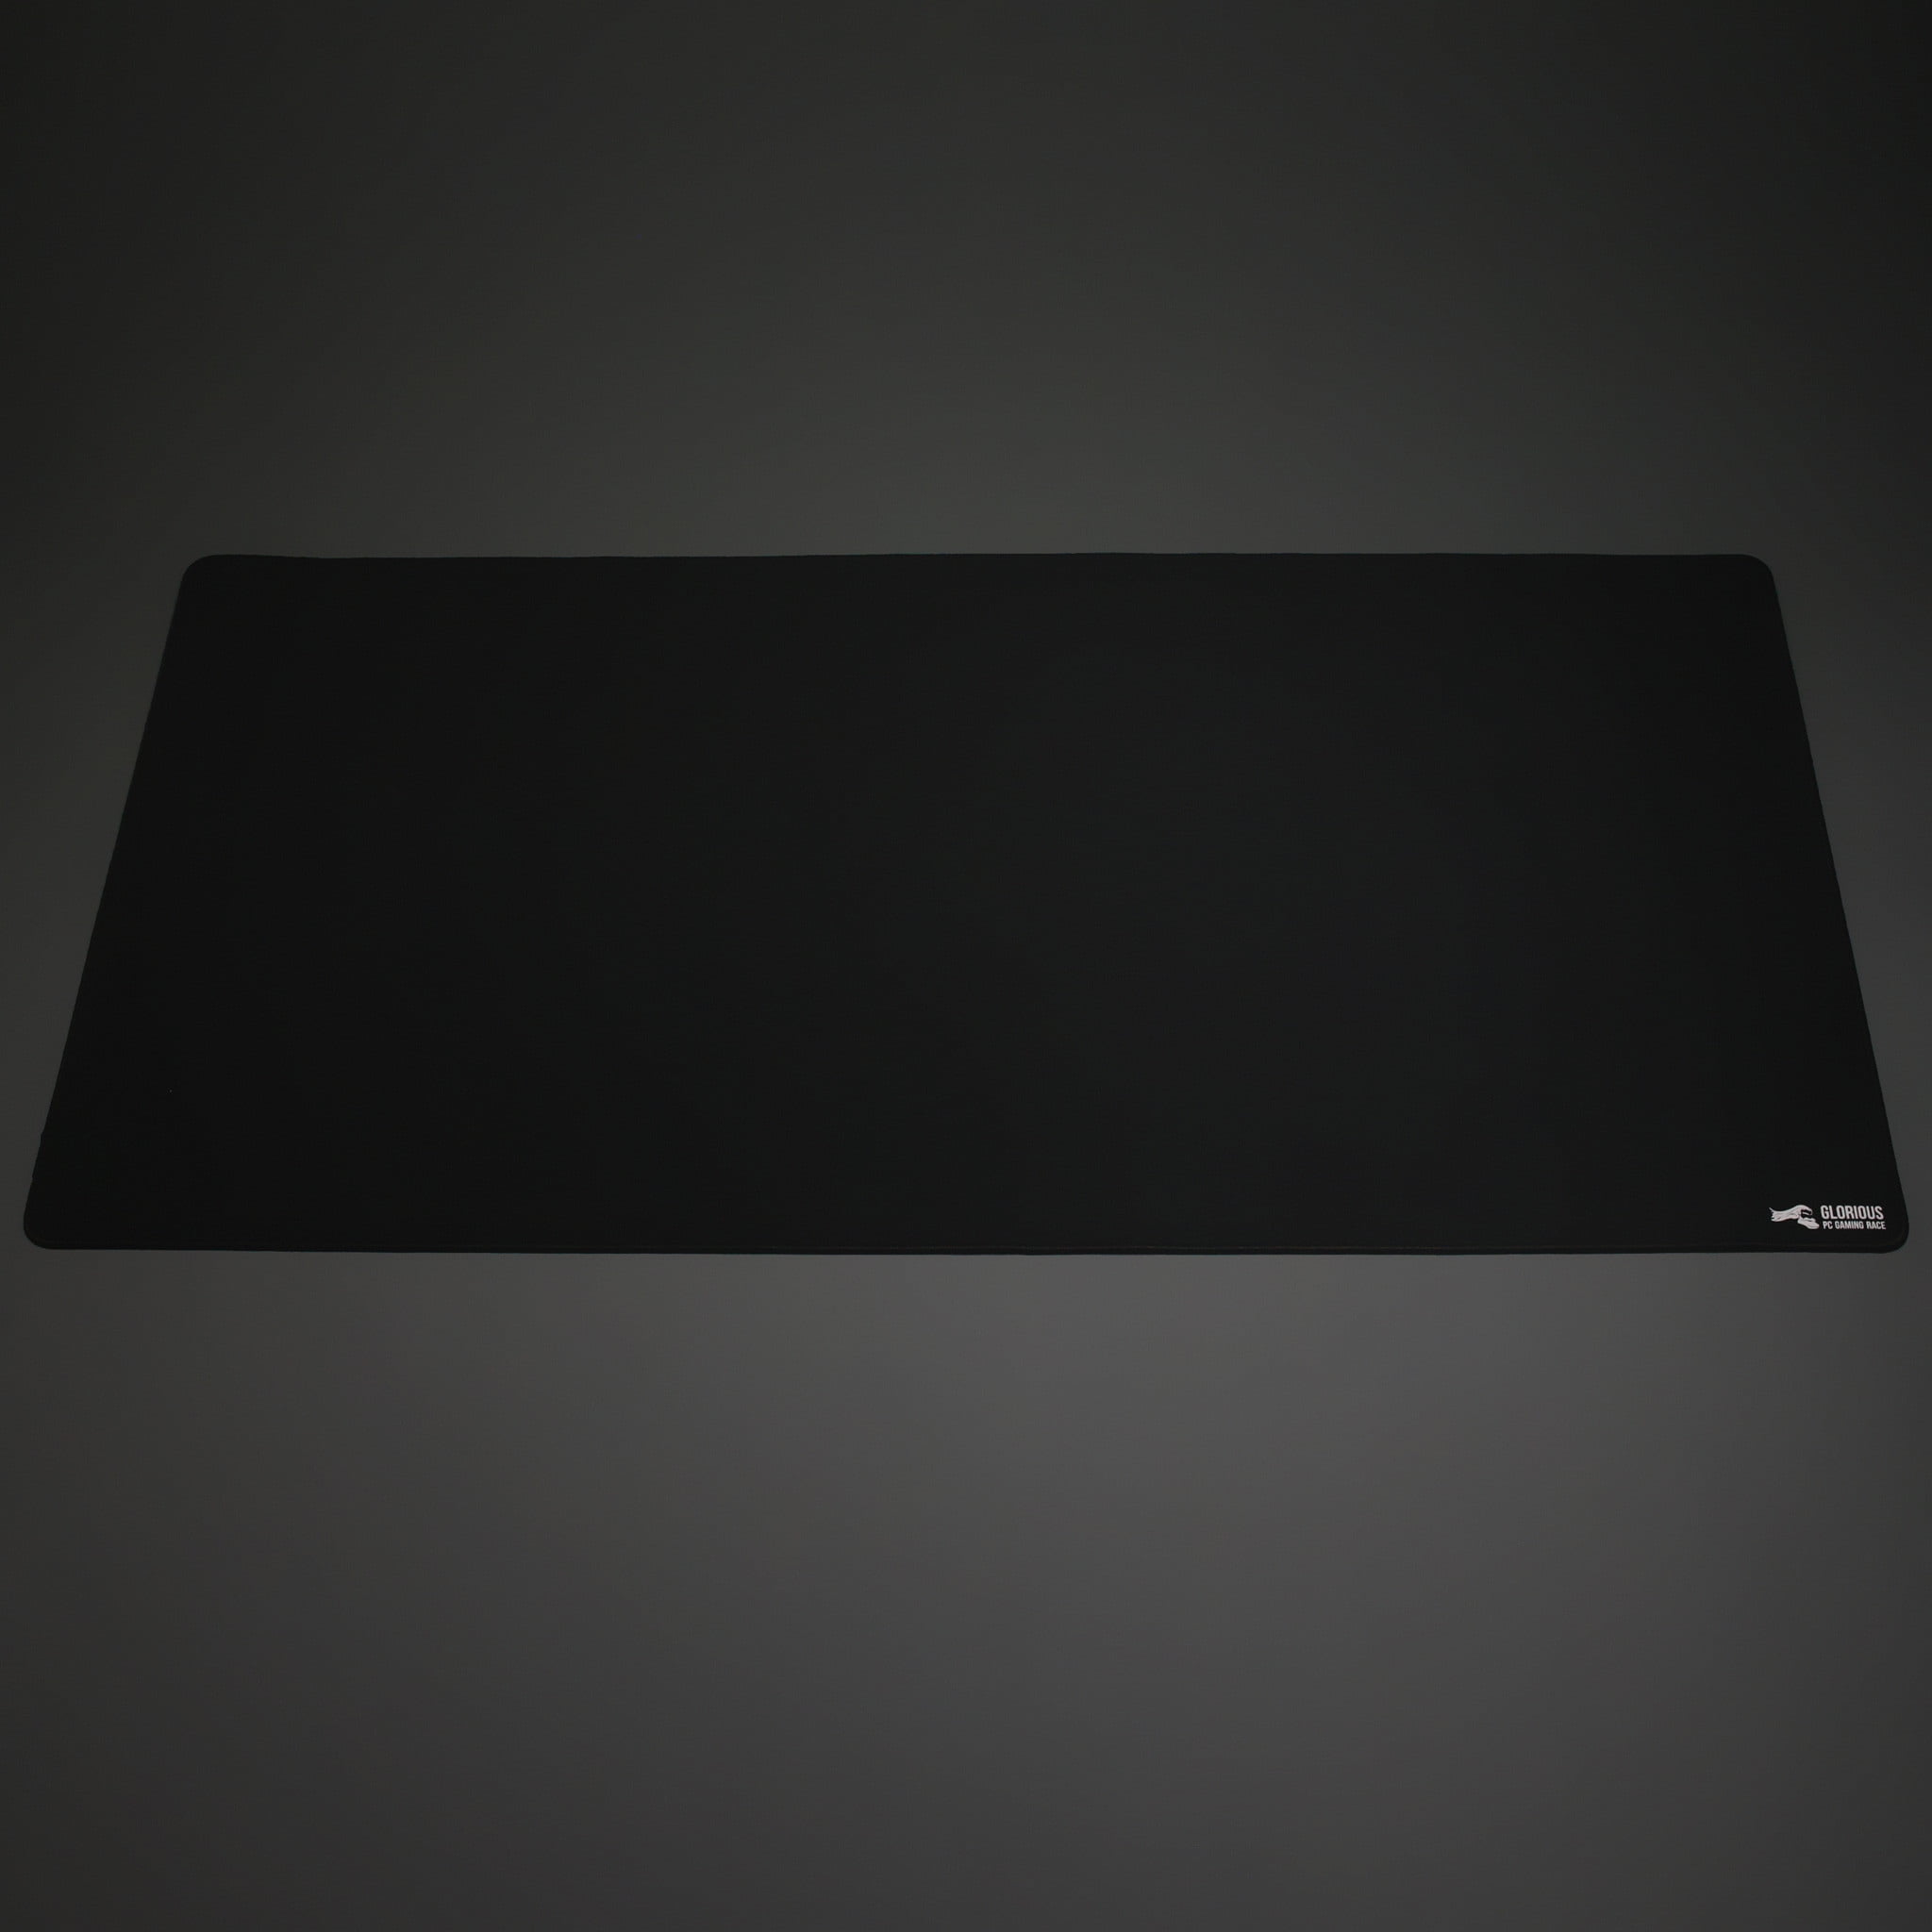 Large Glorious XXL Extended Gaming Mouse Mat/Pad Black Cloth Mo XLarge Wide 